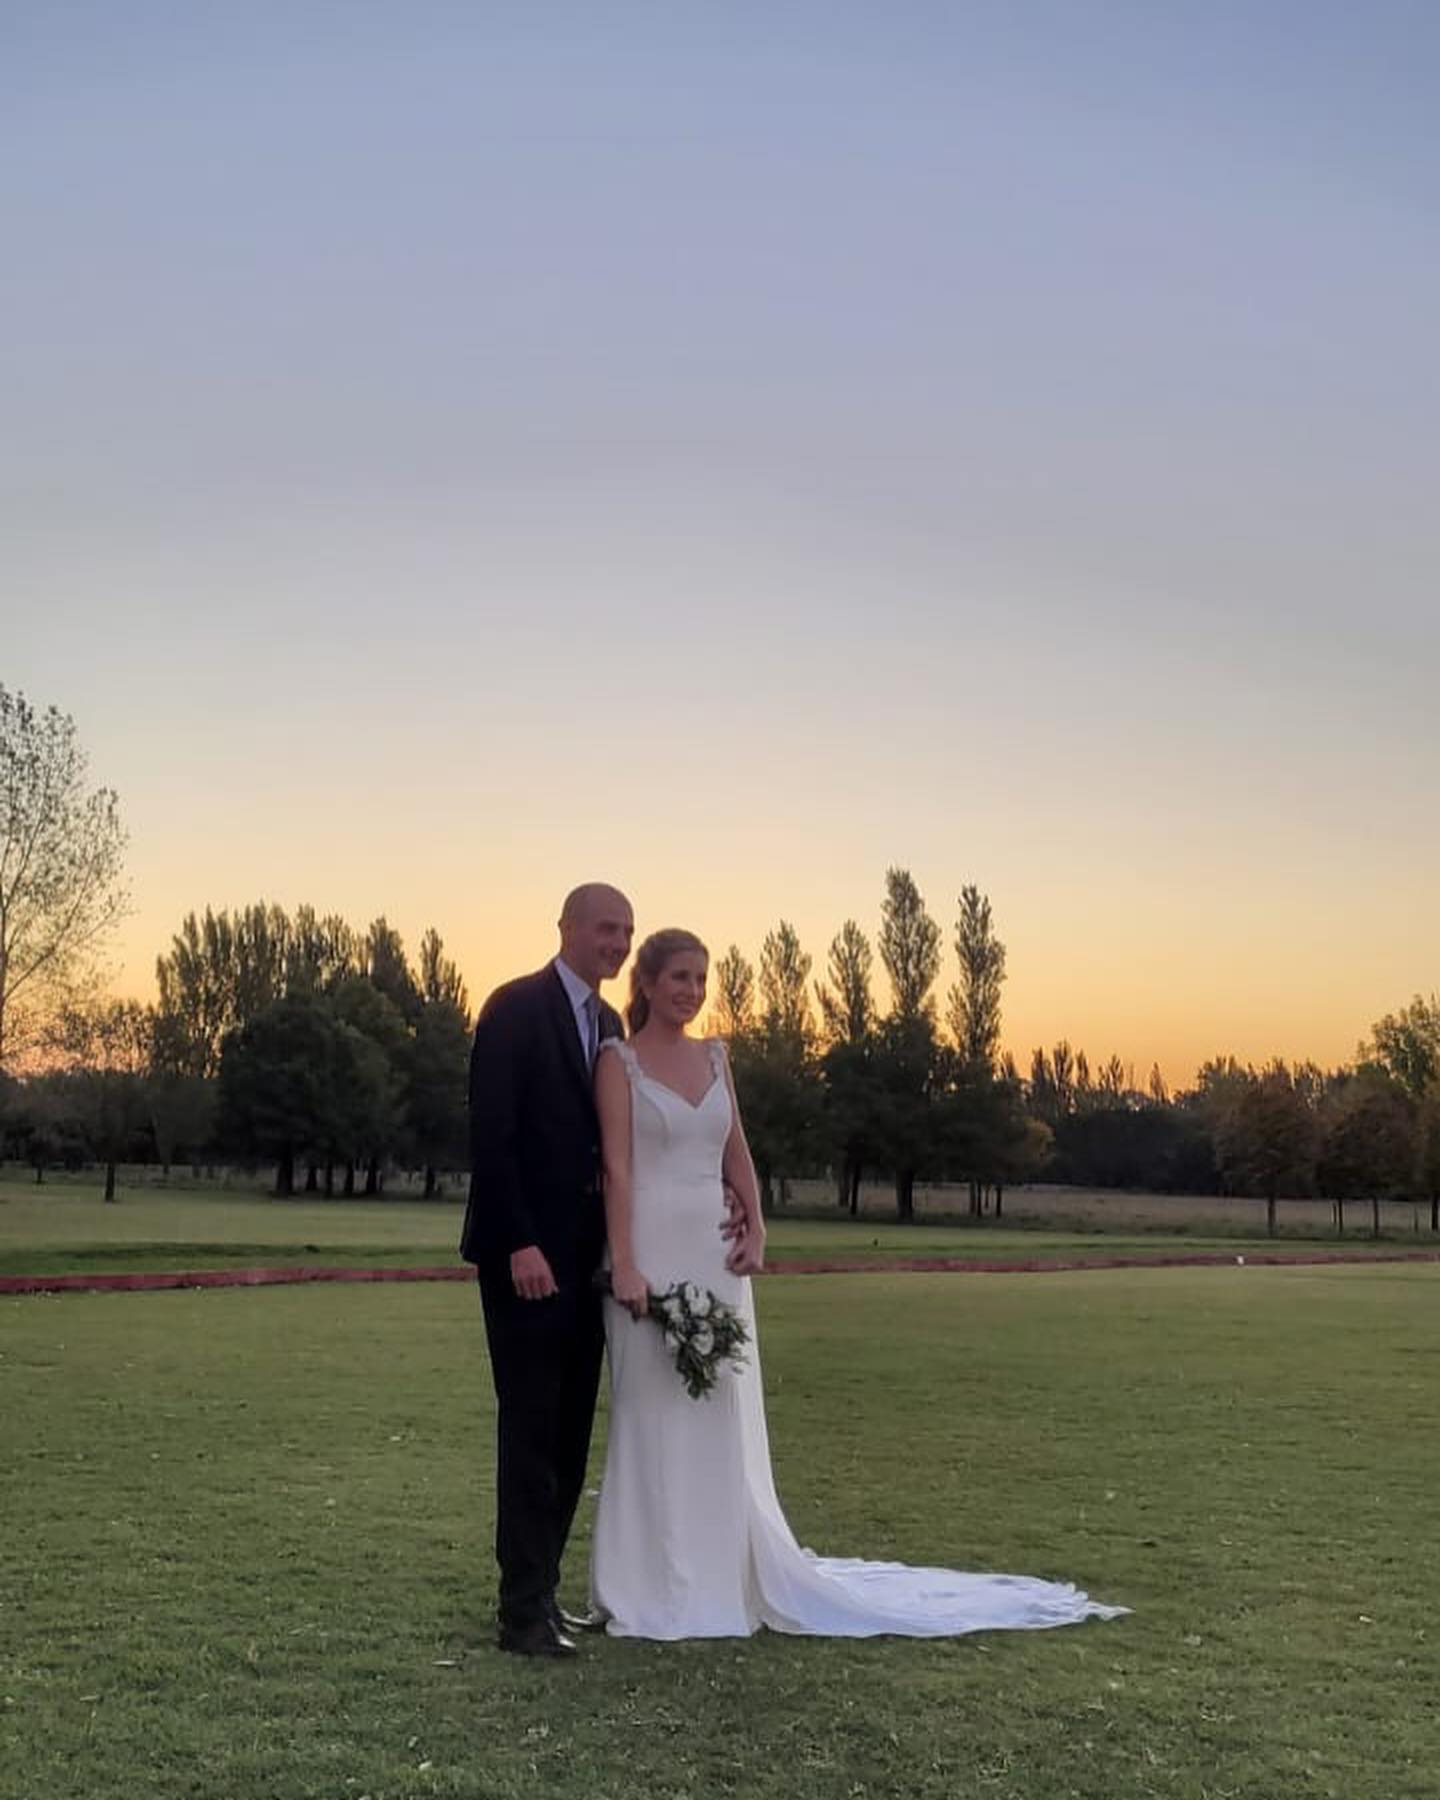 A bride and a groom on their wedding day celebration. They are standing on a field with freshly cut grass, the sunset behind them creating an peach and light blue sky. In the distance, the woods create a beautiful landscape.